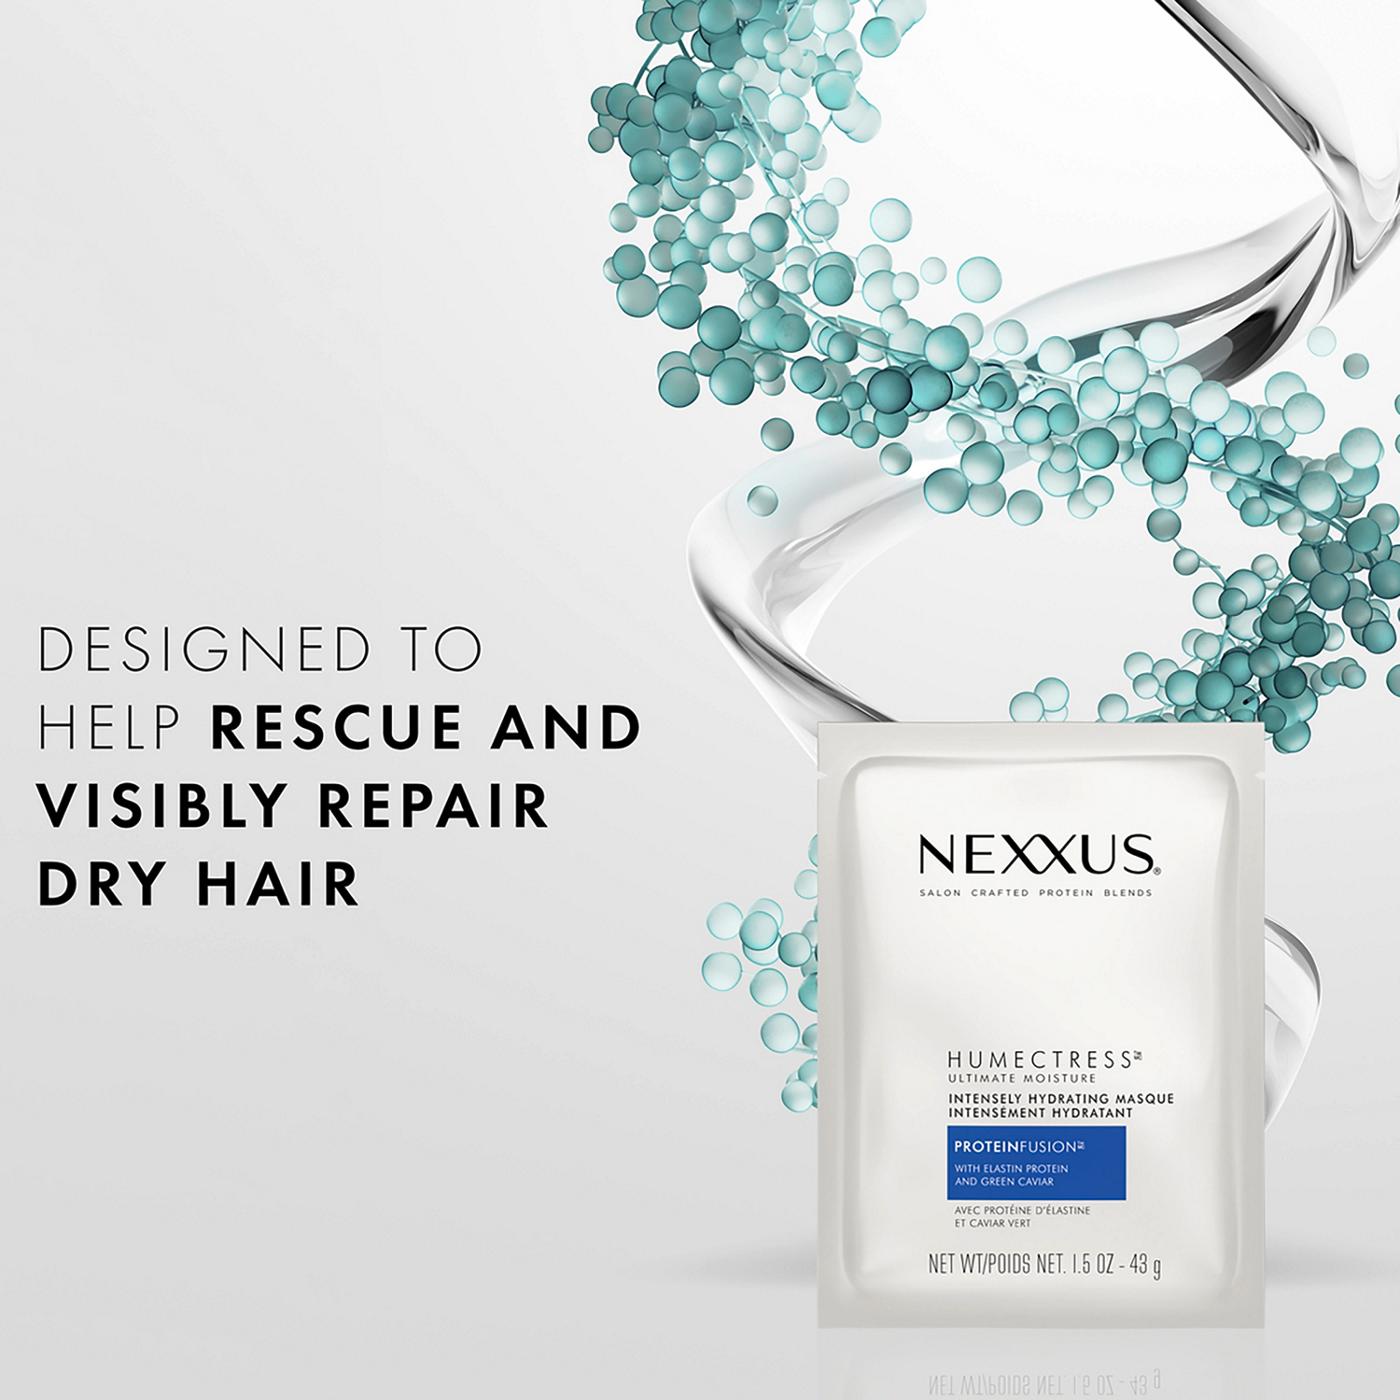 Nexxus Humectress for Normal to Dry Hair Moisture Masque; image 10 of 10